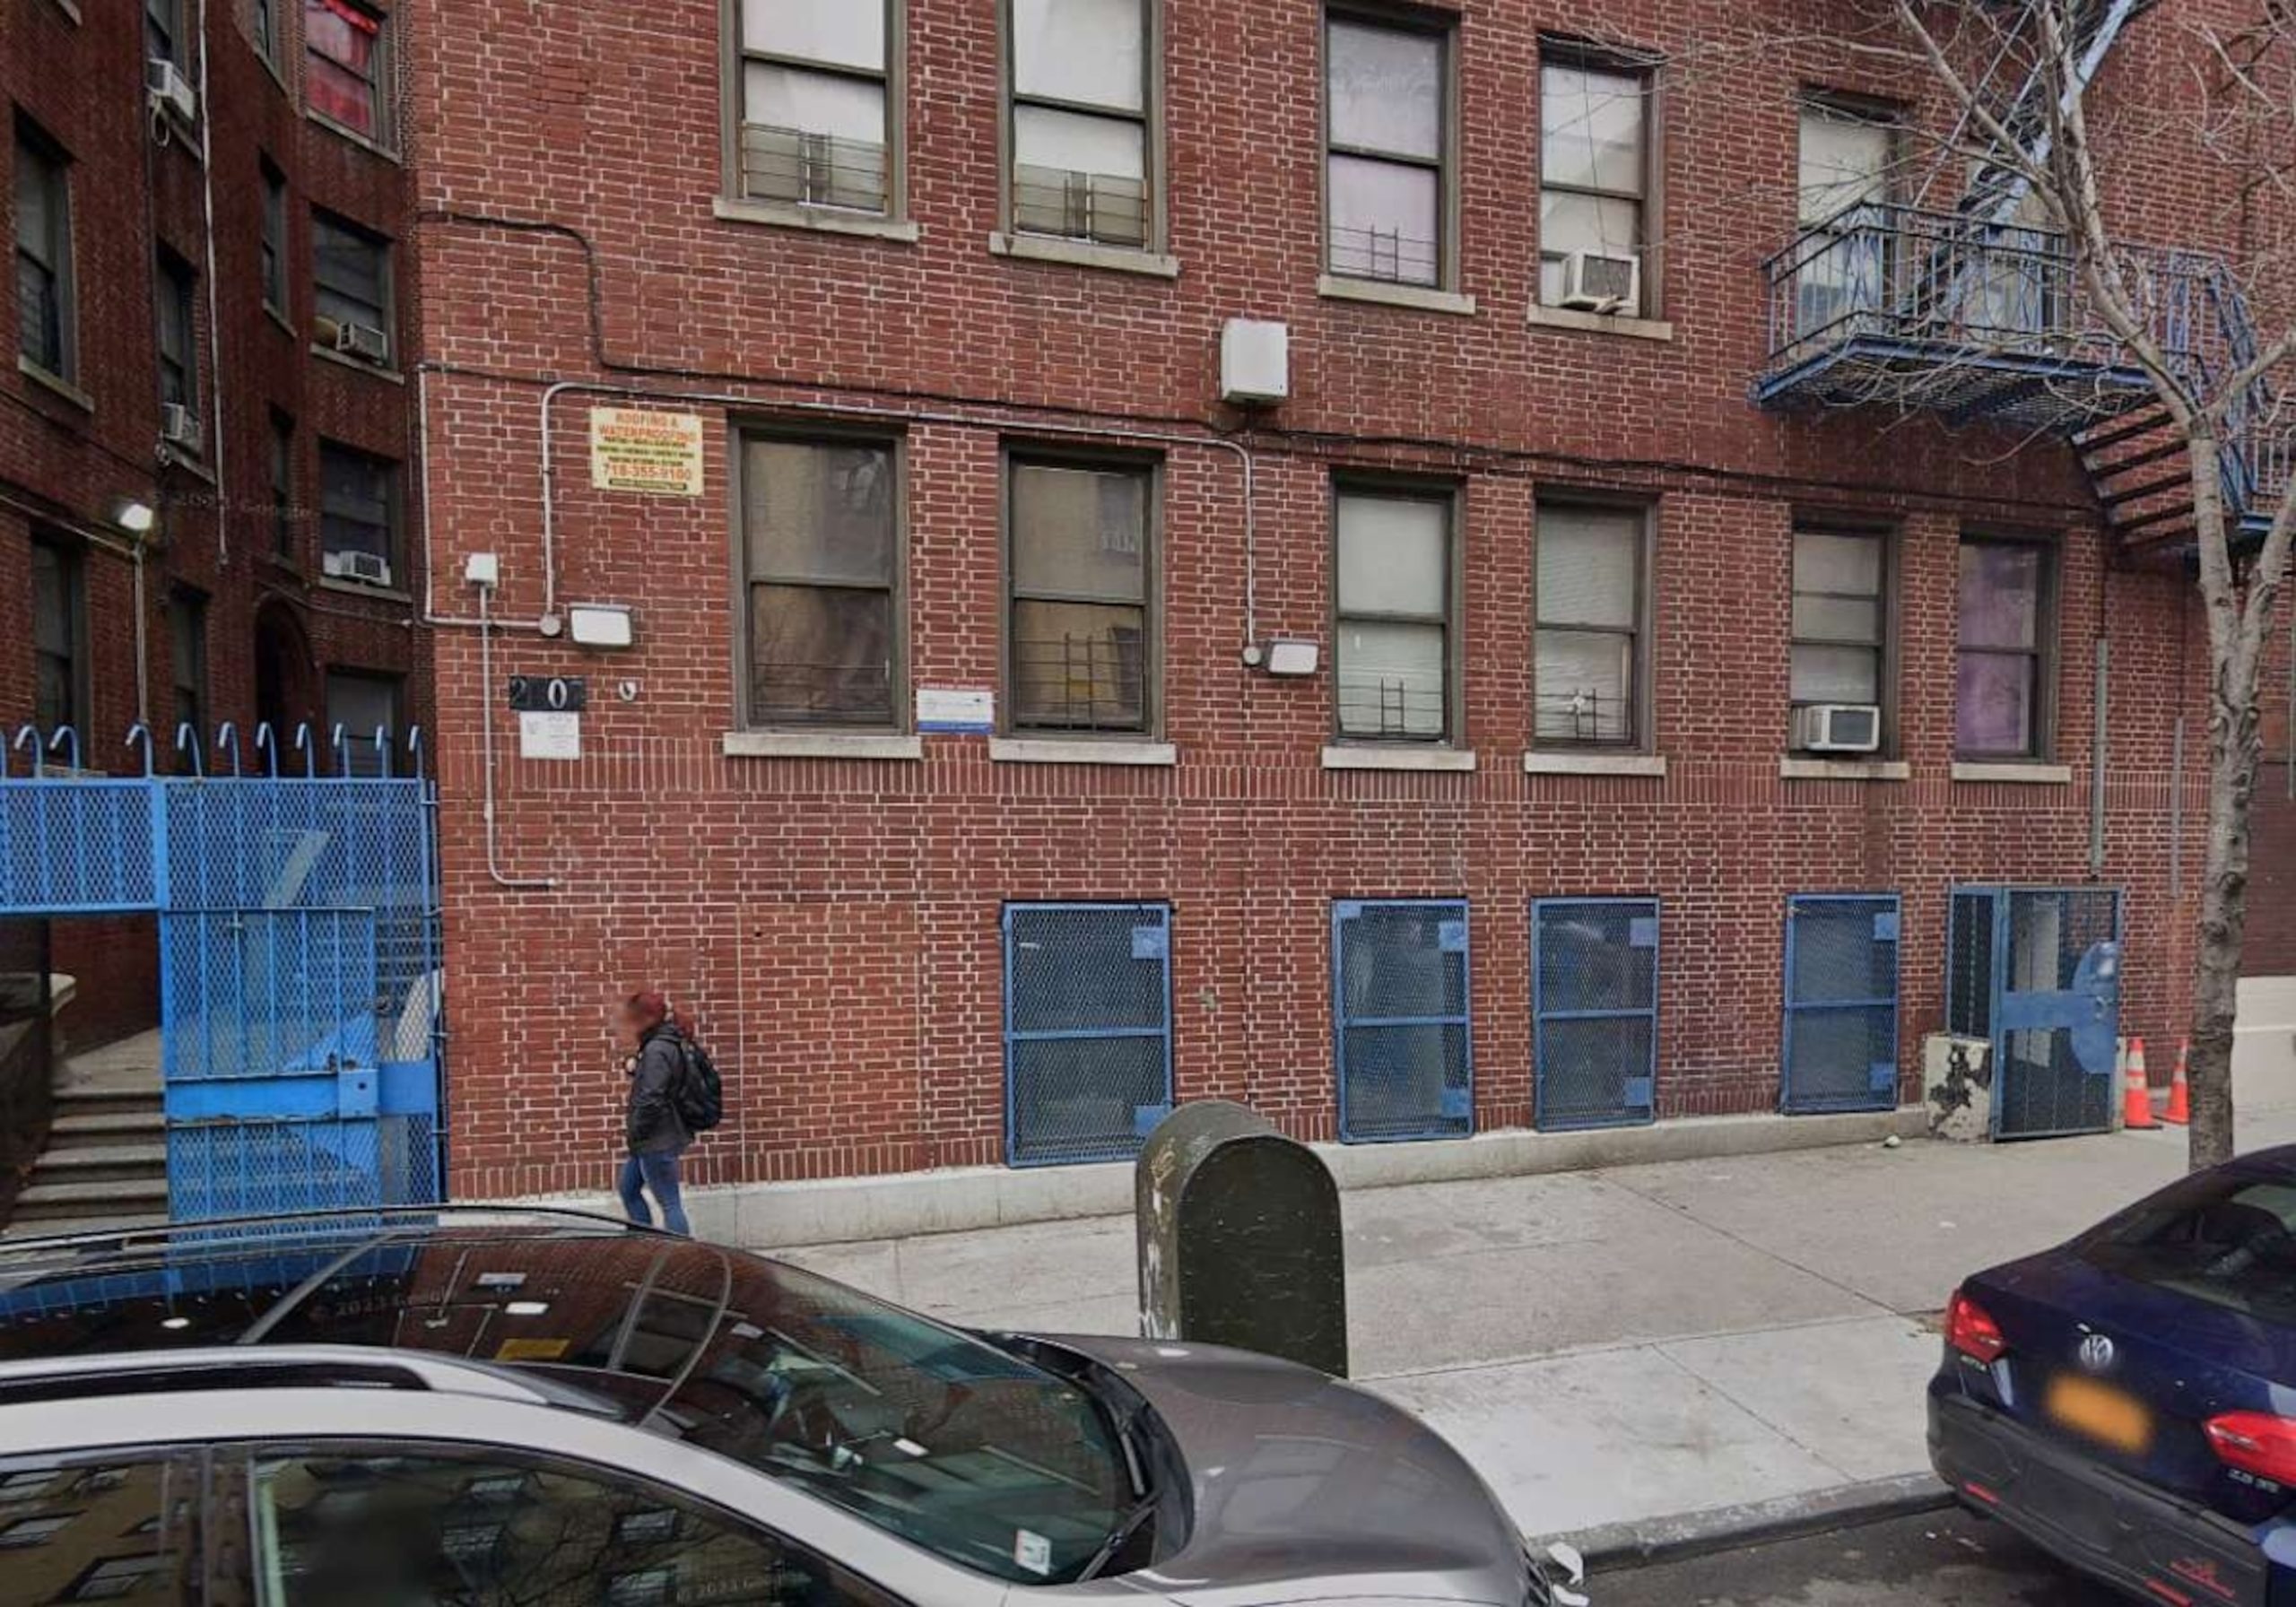 Police report: One-year-old child dies and three others hospitalized due to suspected opioid exposure at New York City day care